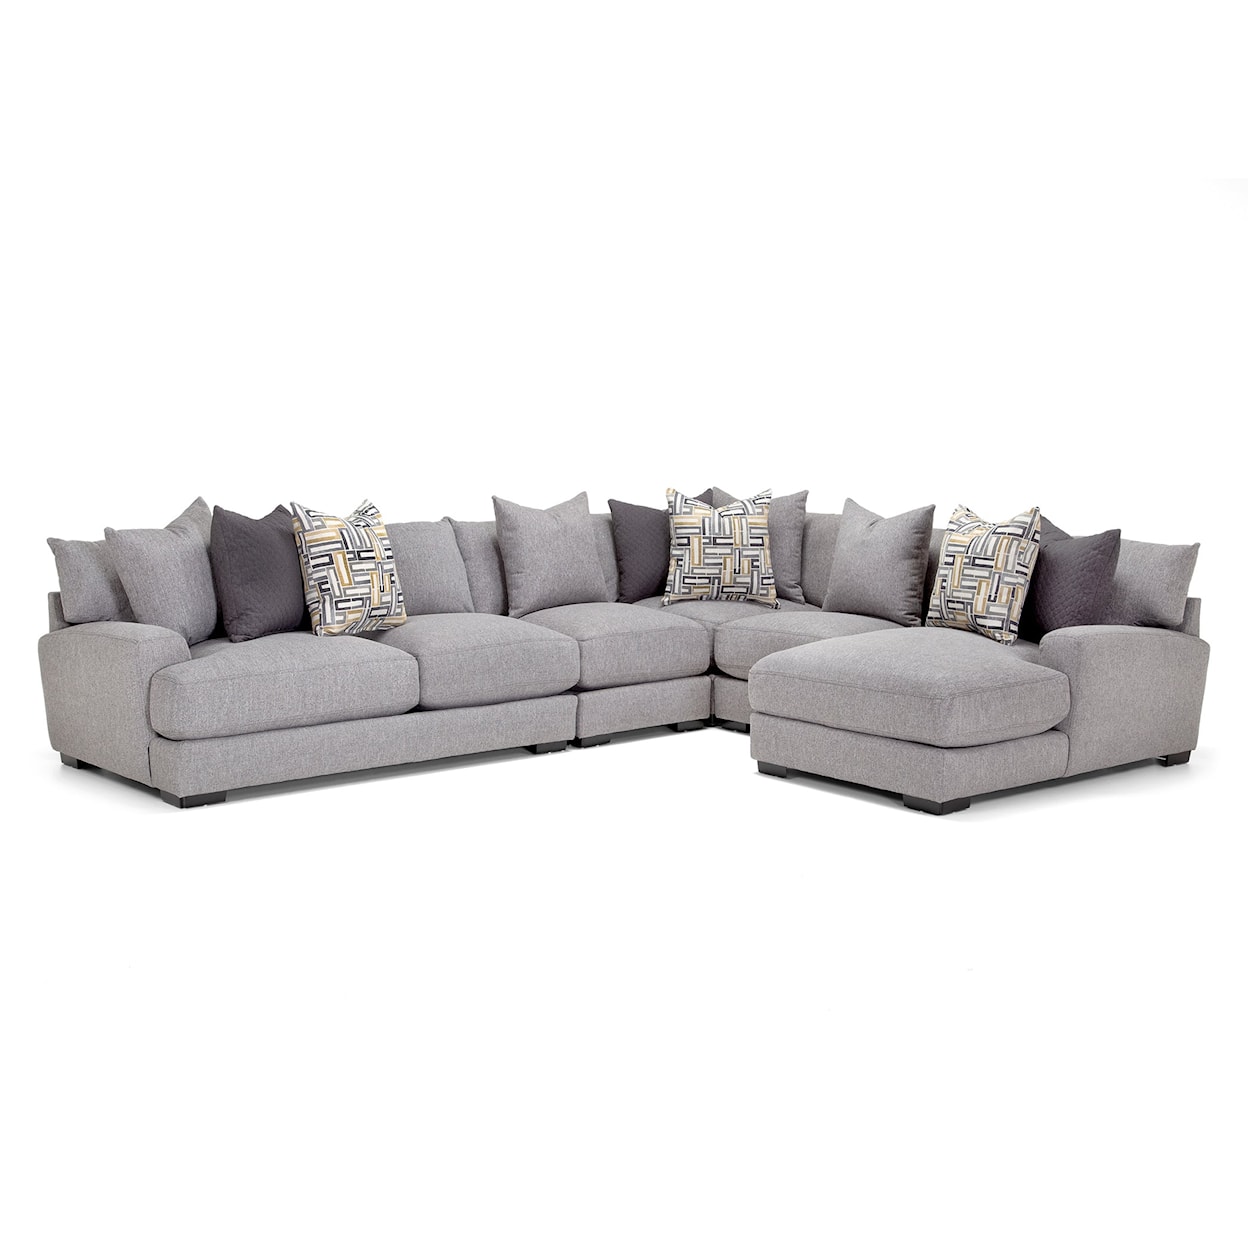 Franklin 818 Brentwood Sectional Sofa